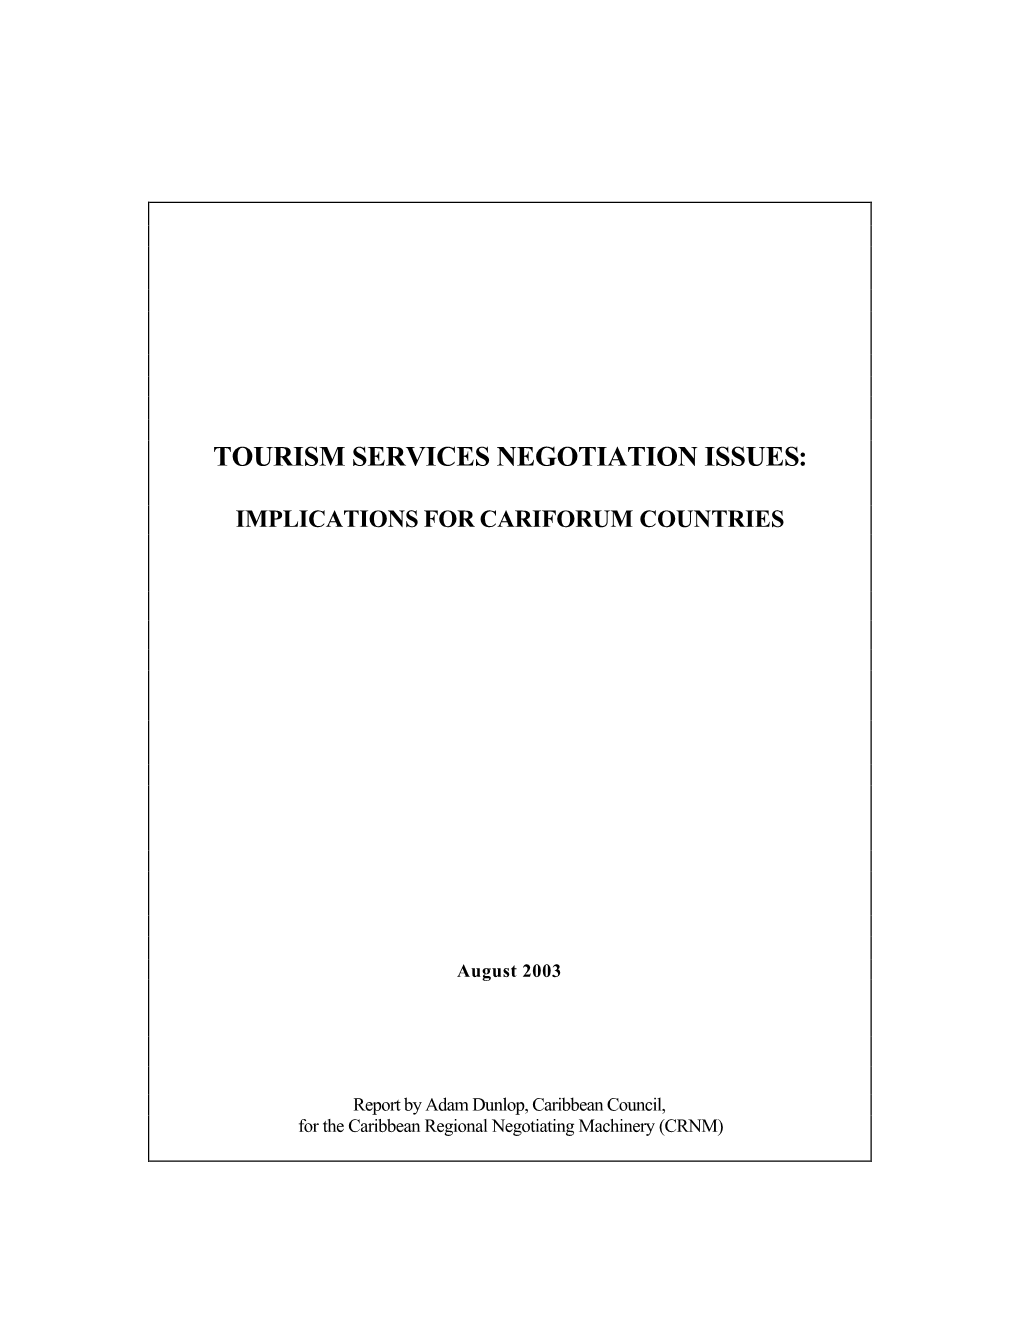 Report on Tourism and Services. Final